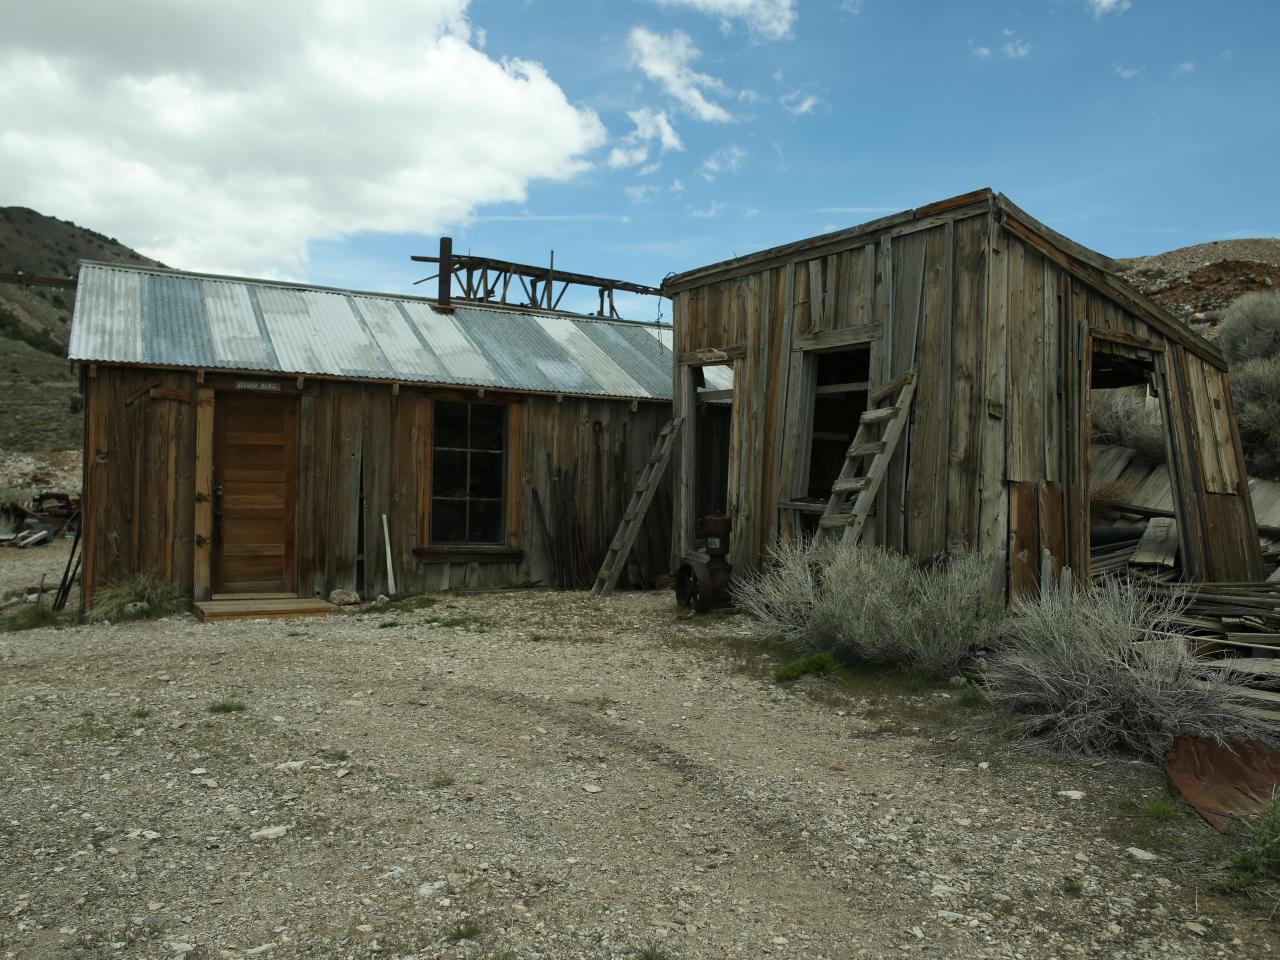 You'll Soon Be Able to Stay in This Historic California Ghost Town